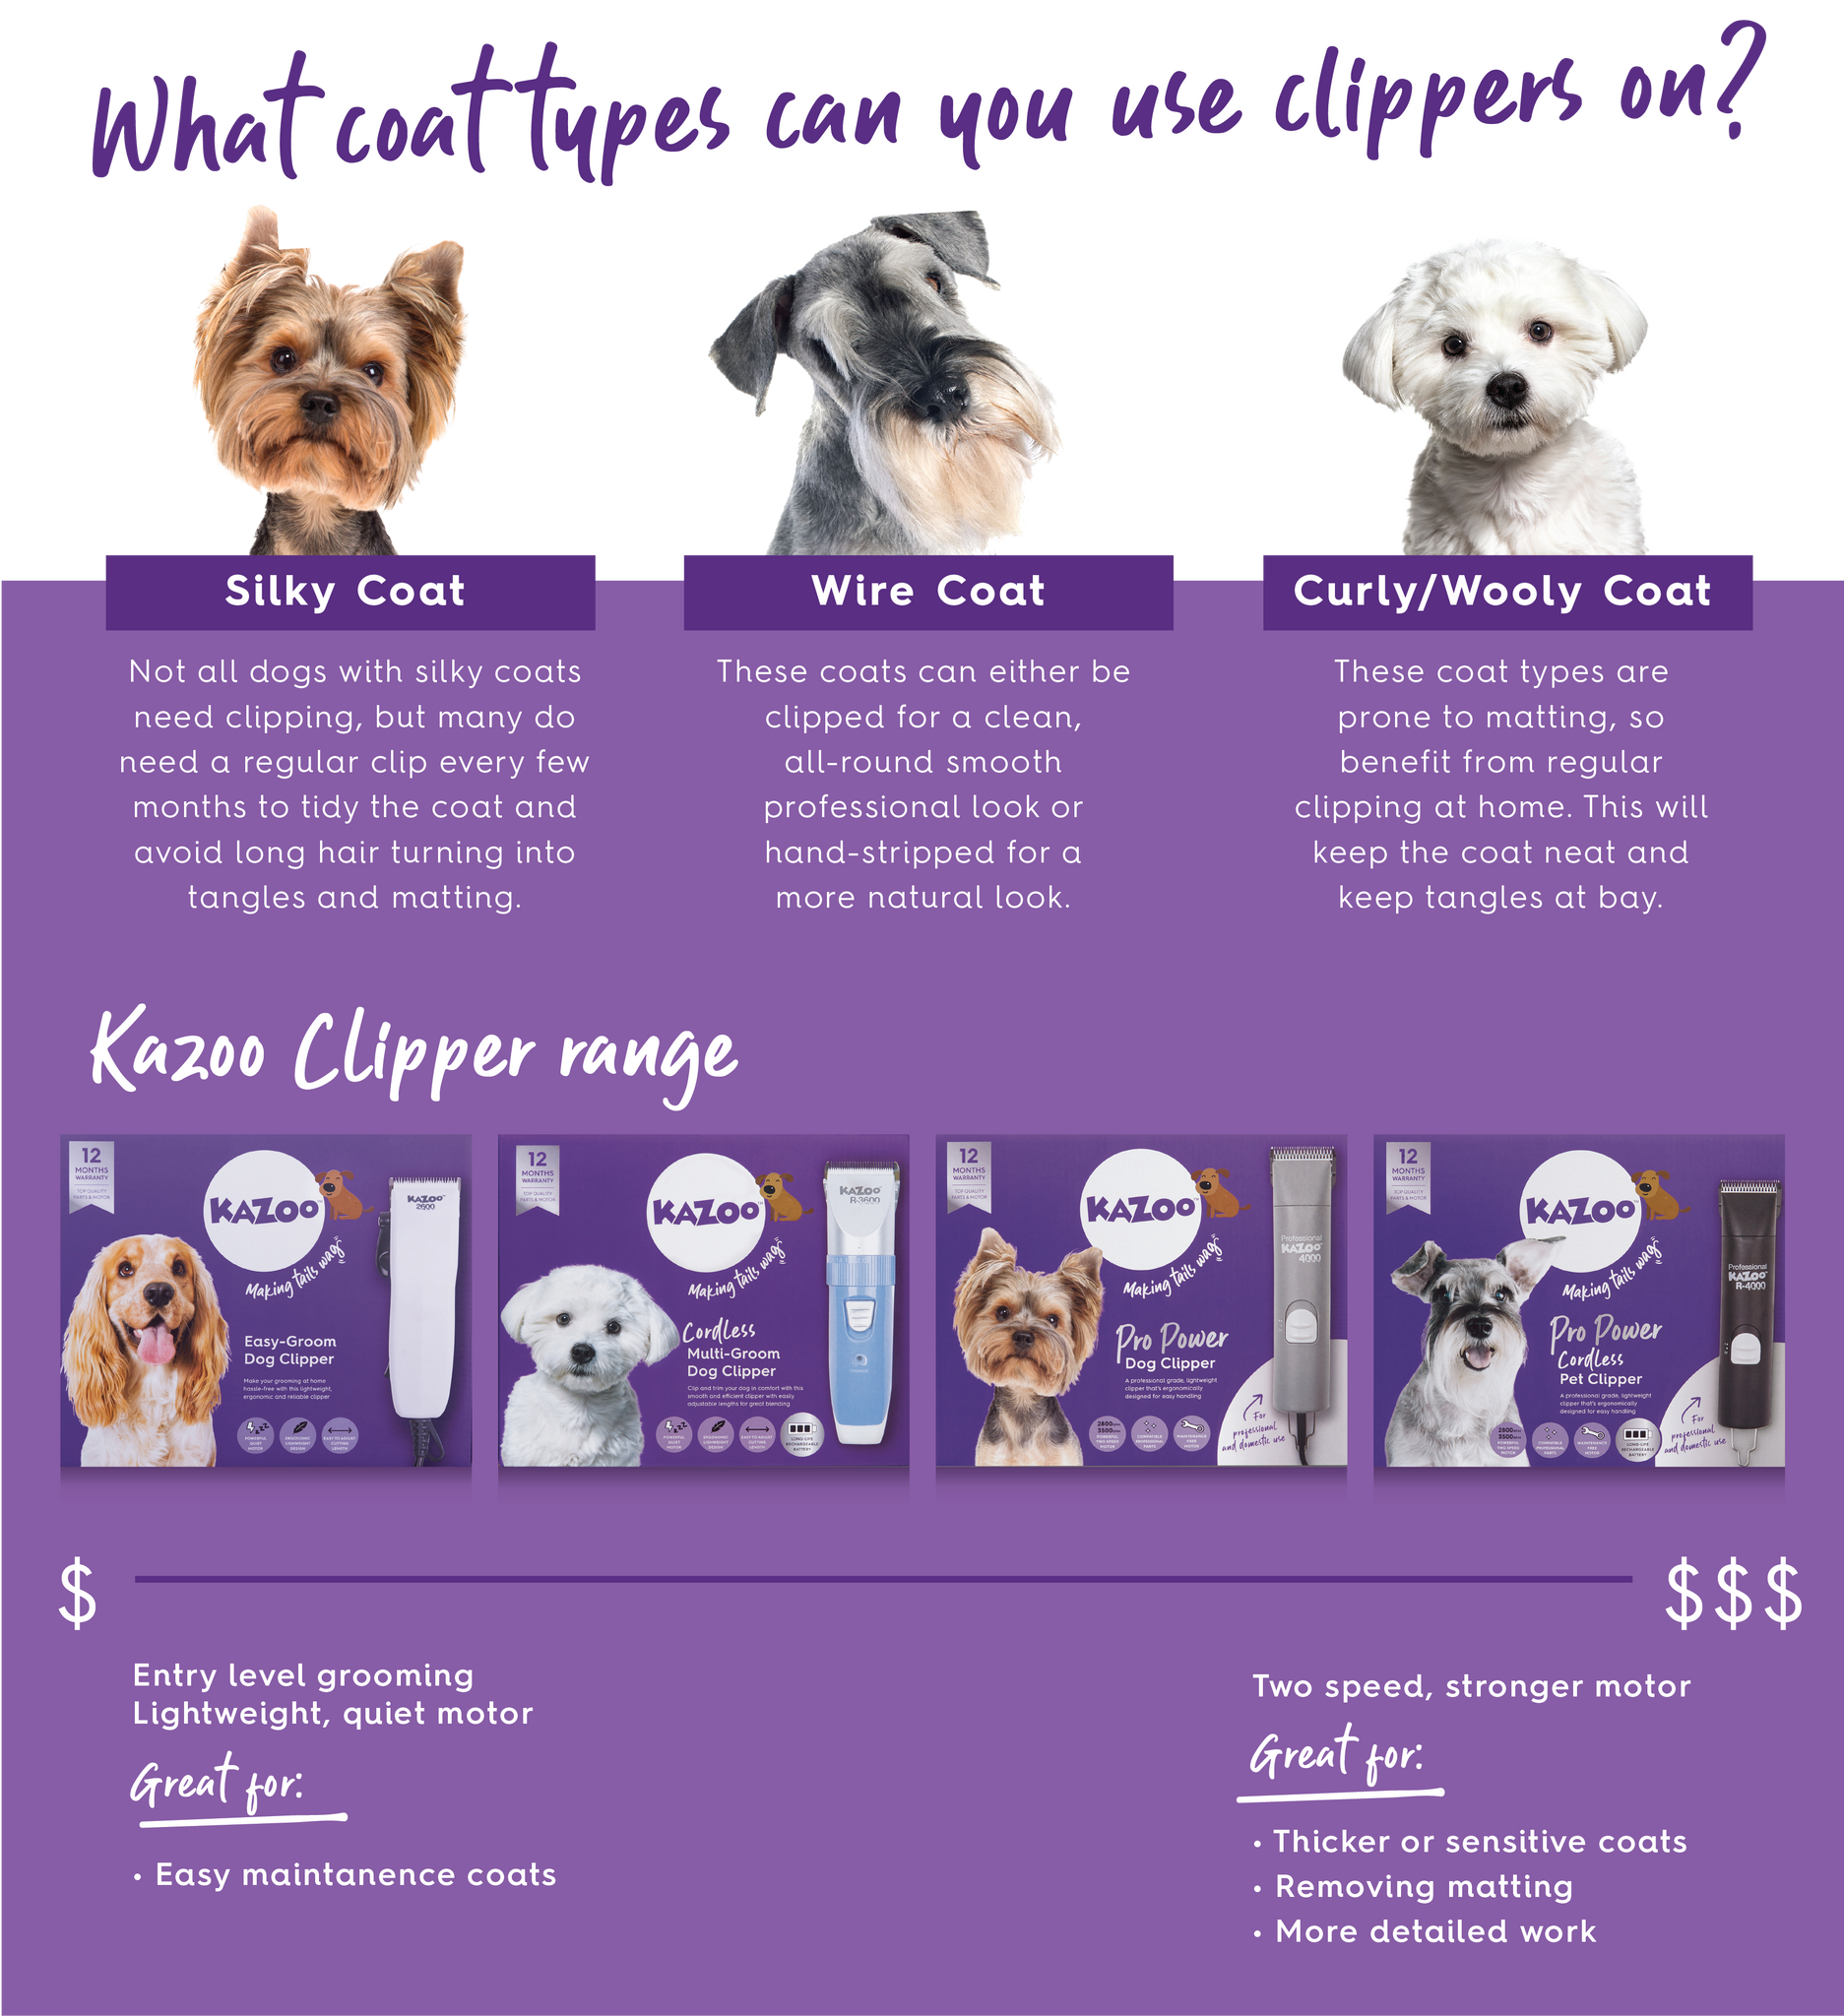 Dog clippers range and dog coats that can be clipped